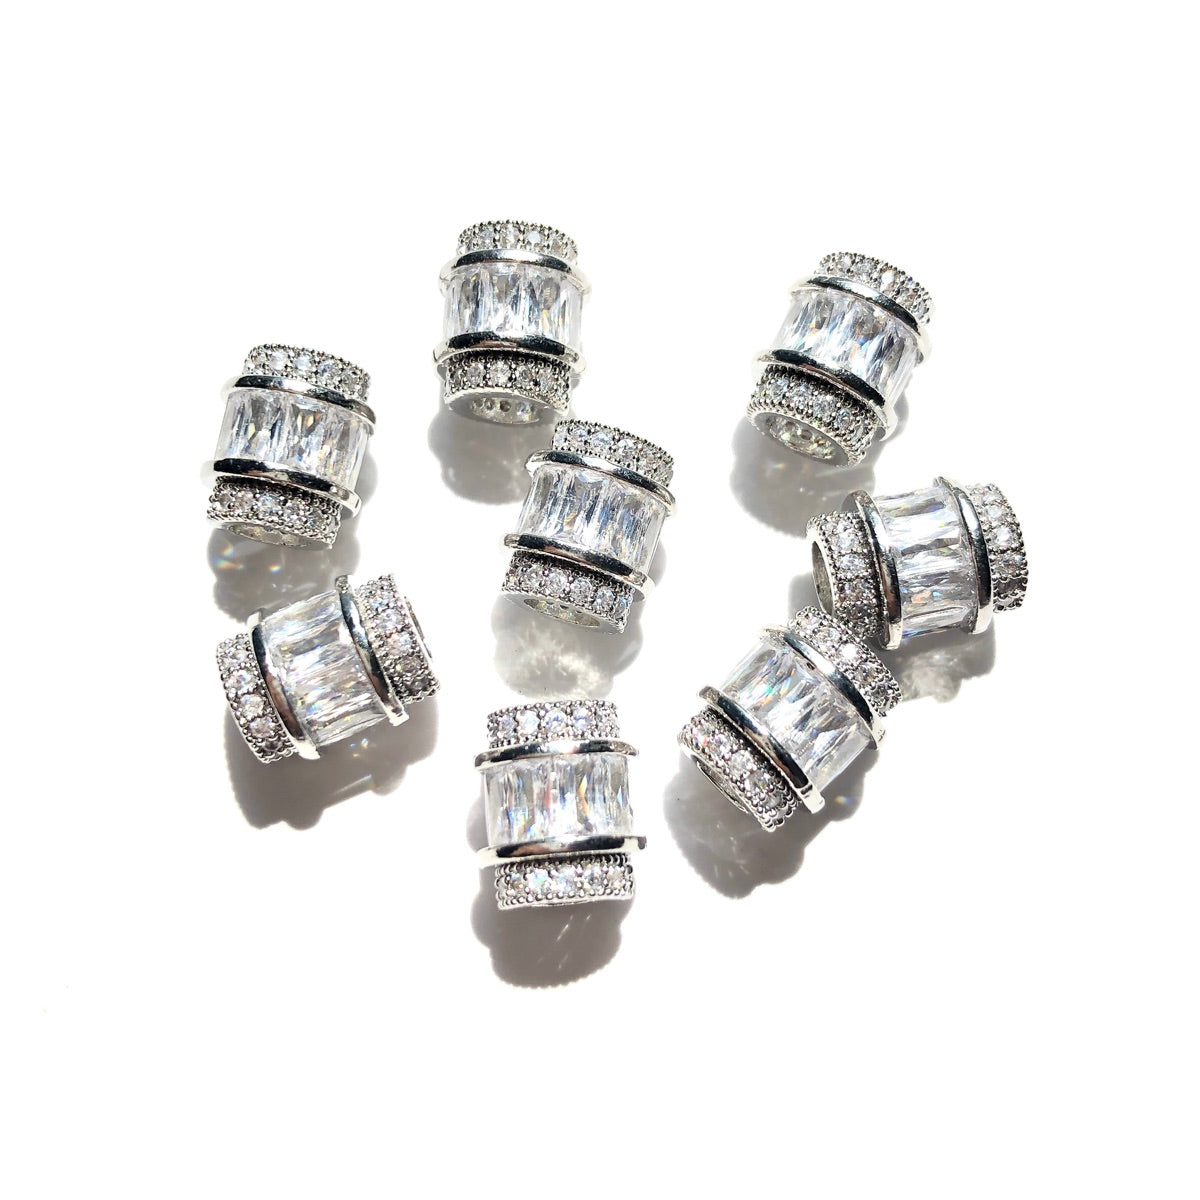 10pcs/lot 9.6/12mm Clear CZ Paved Big Hole Spacers Silver CZ Paved Spacers Big Hole Beads New Spacers Arrivals Charms Beads Beyond